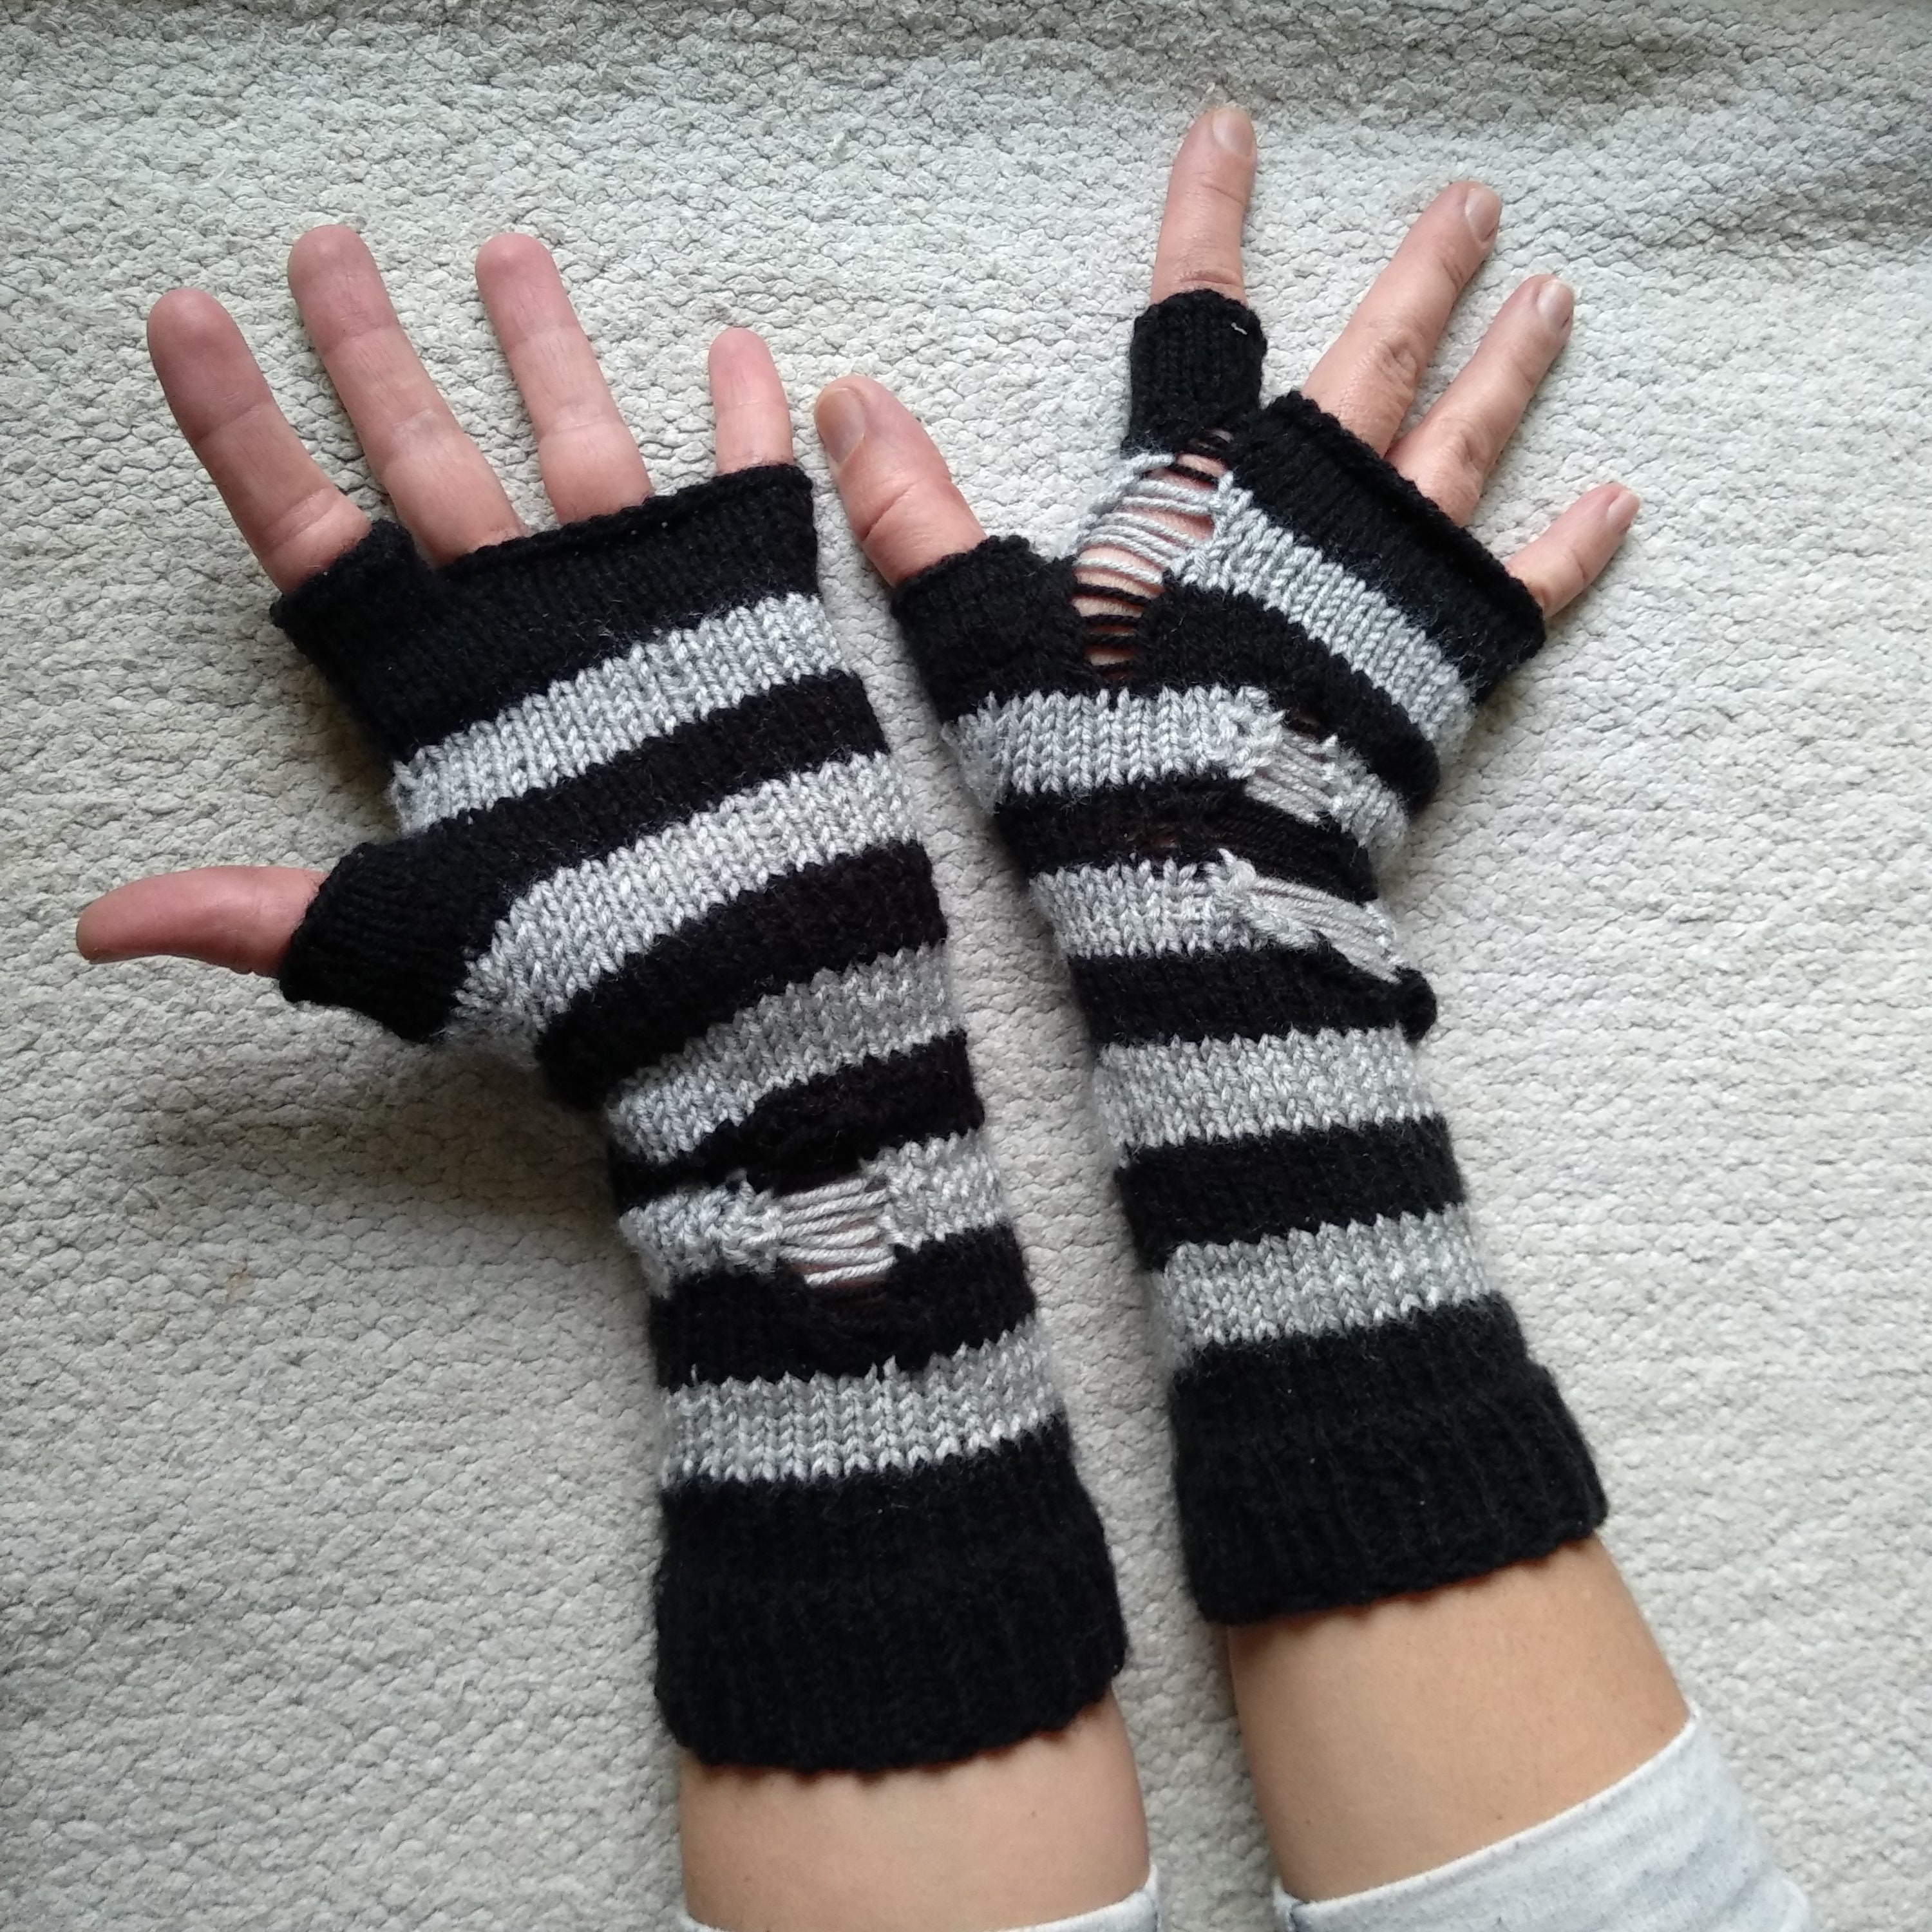 Striped unisex Gray Arm Warmers, Emo Fingerless Gloves with Holes, Gothic Torned Mittens, Anime Clothing, Halloween Costume